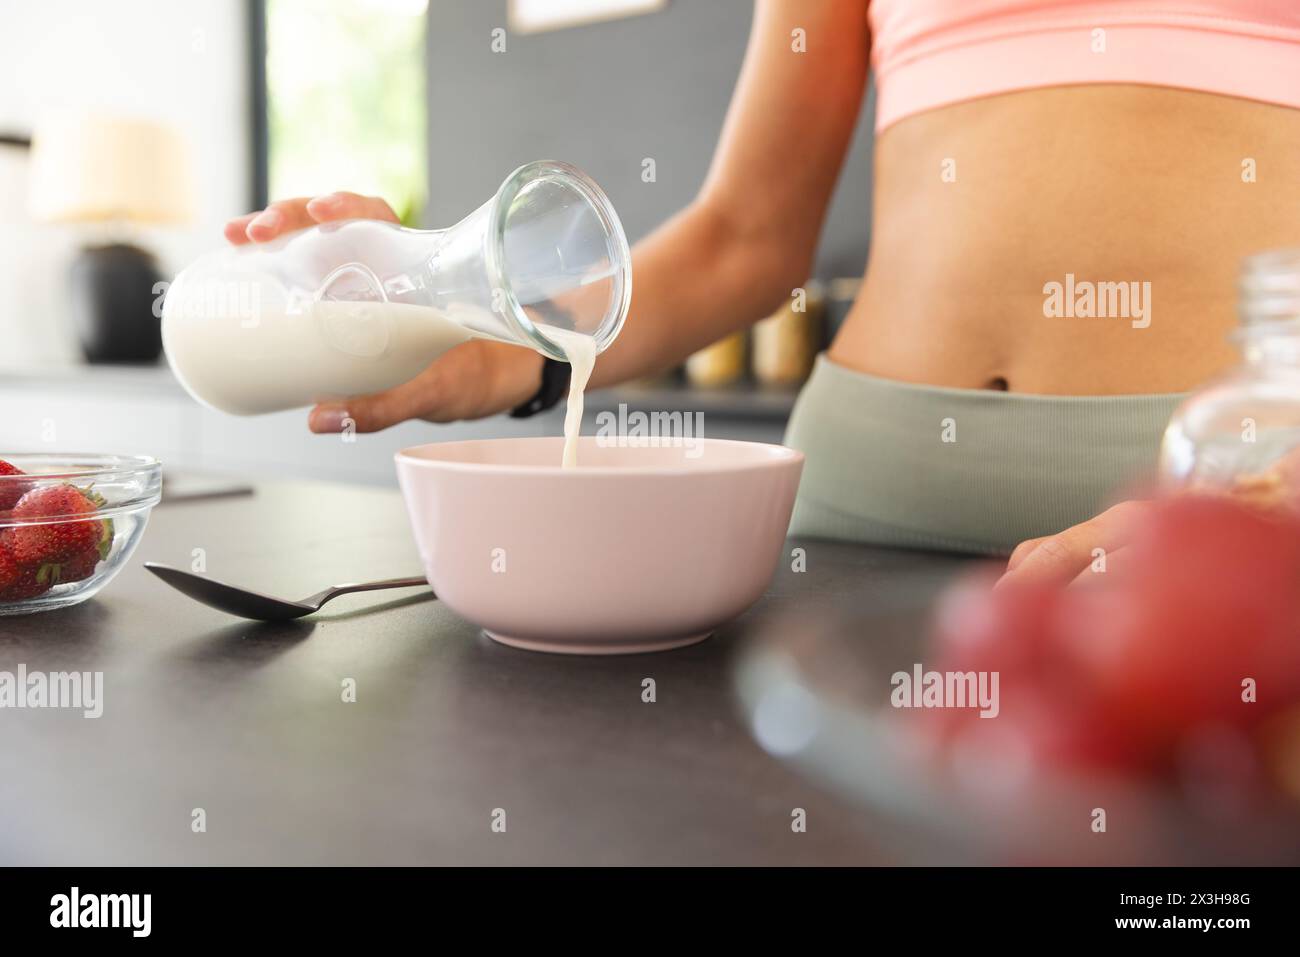 A young Caucasian woman at home, wearing pink crop top, pouring milk into a bowl Stock Photo